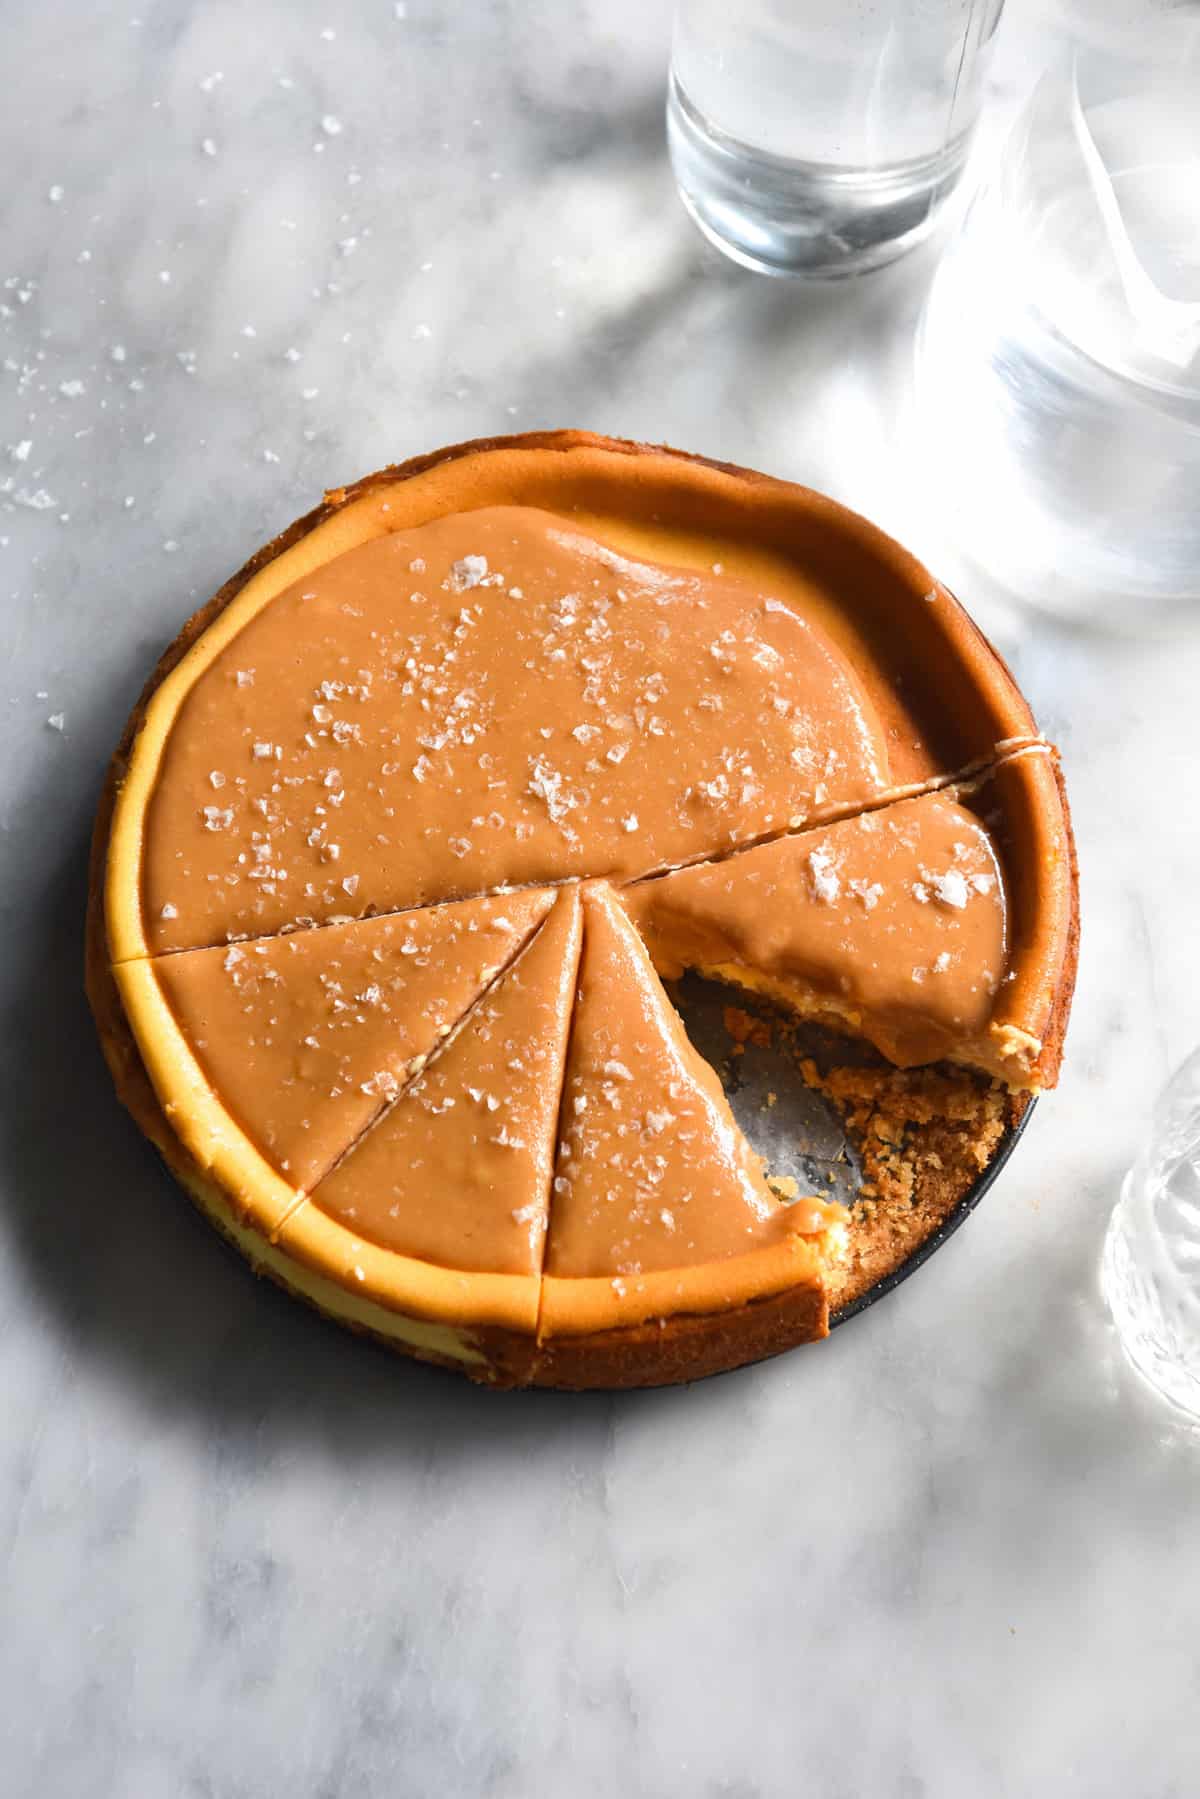 Lactose free cheesecake on a gluten + grain free base with lactose free salted caramel (aka dulce de leche) from www.georgeats.com | @georgeats